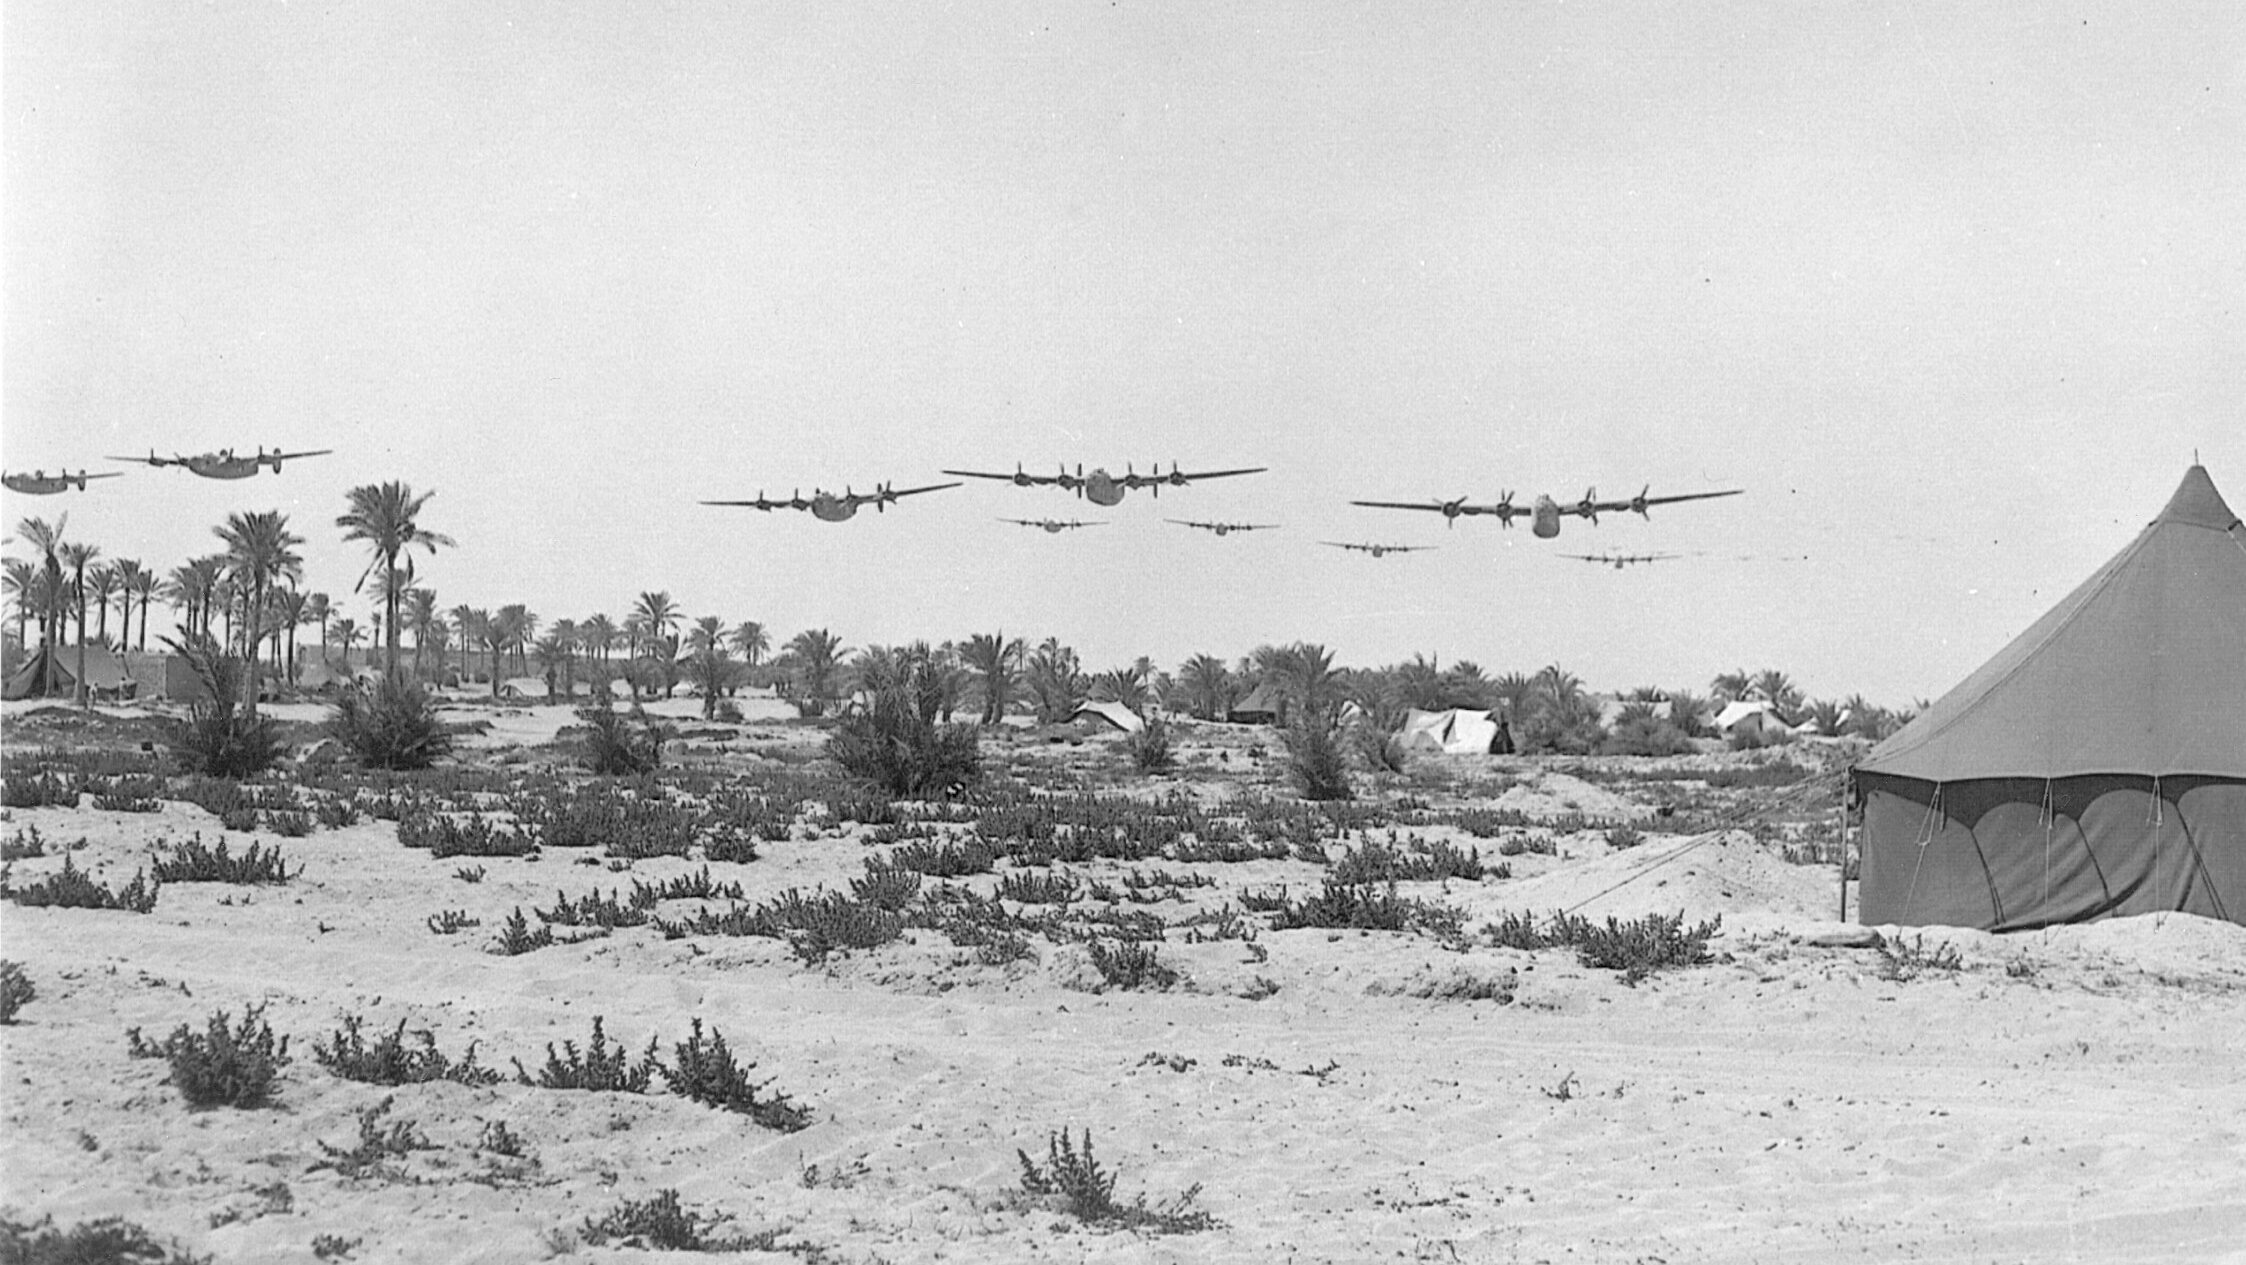 B-24s approach the safety of their North African bases after dropping a lethal cargo on the refineries of Ploesti, Romania.